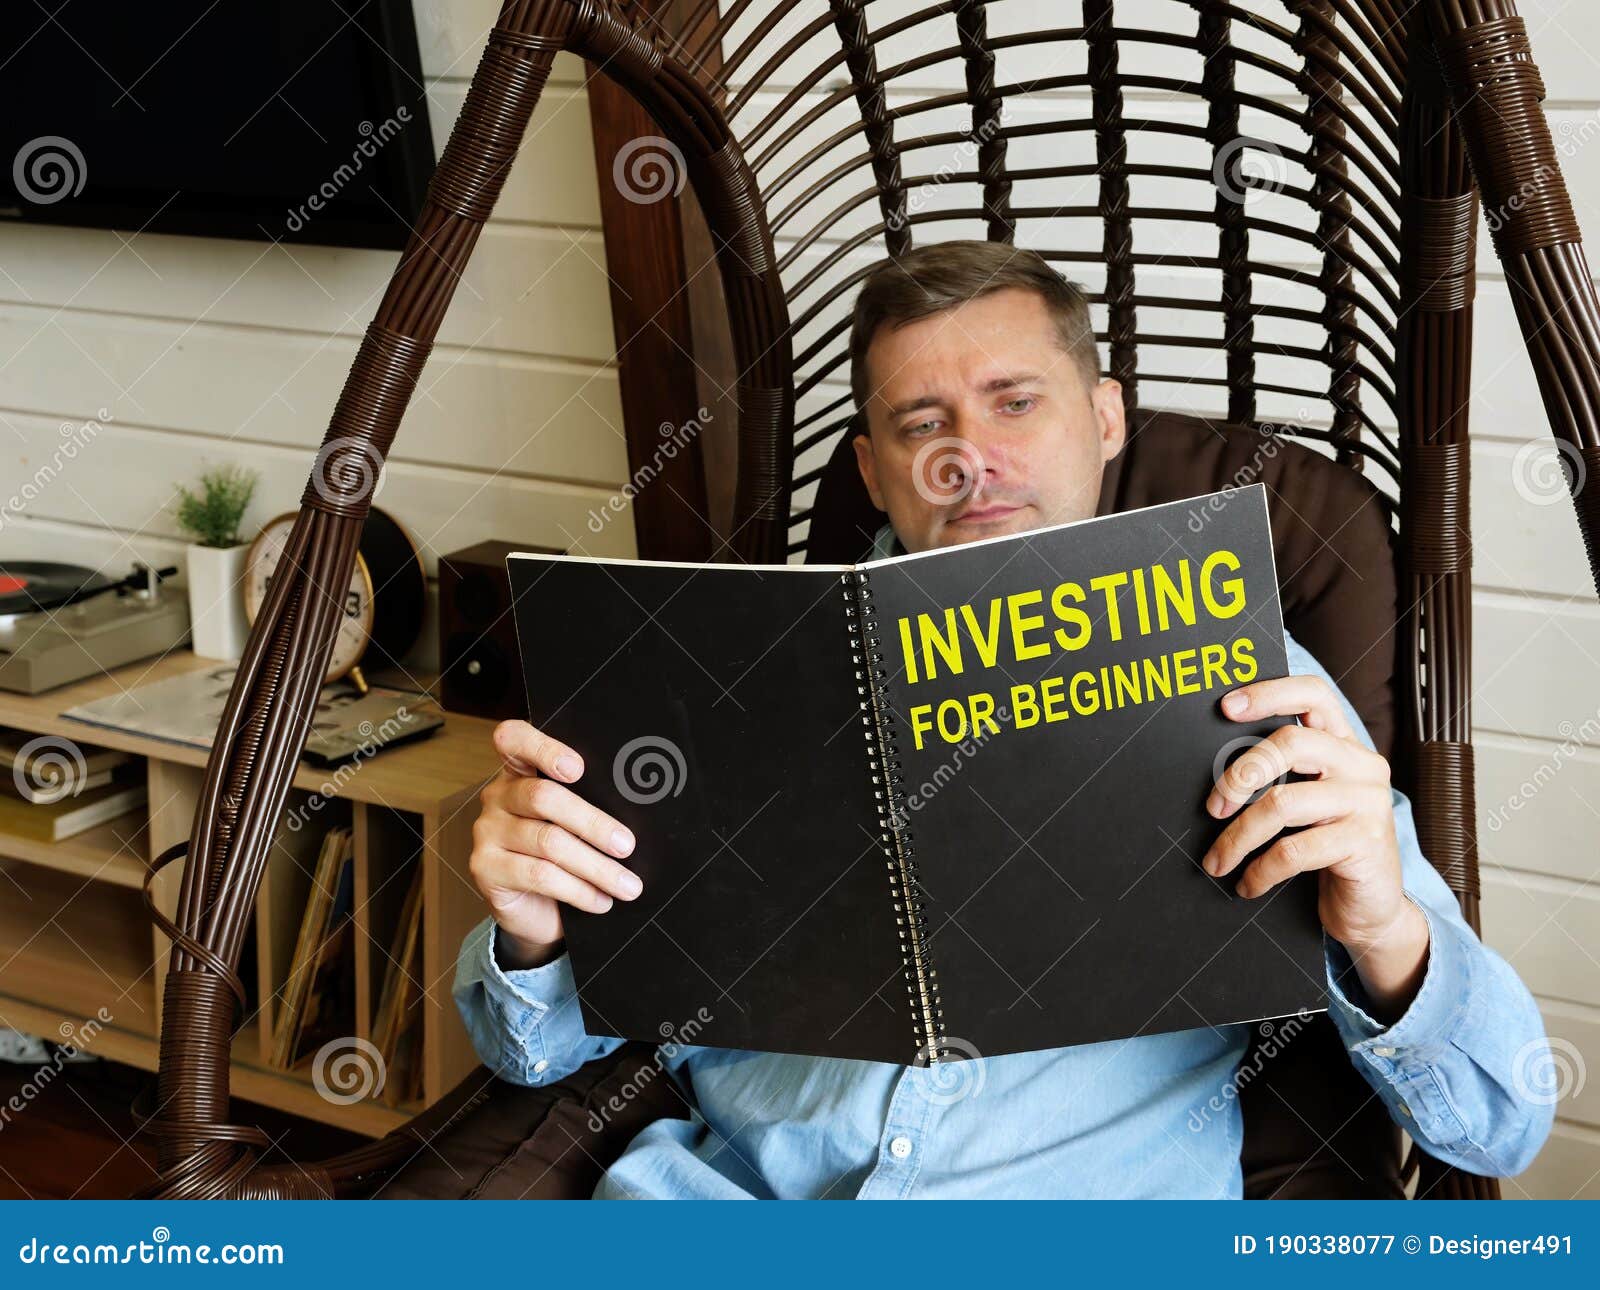 man reads investing for beginners at home.